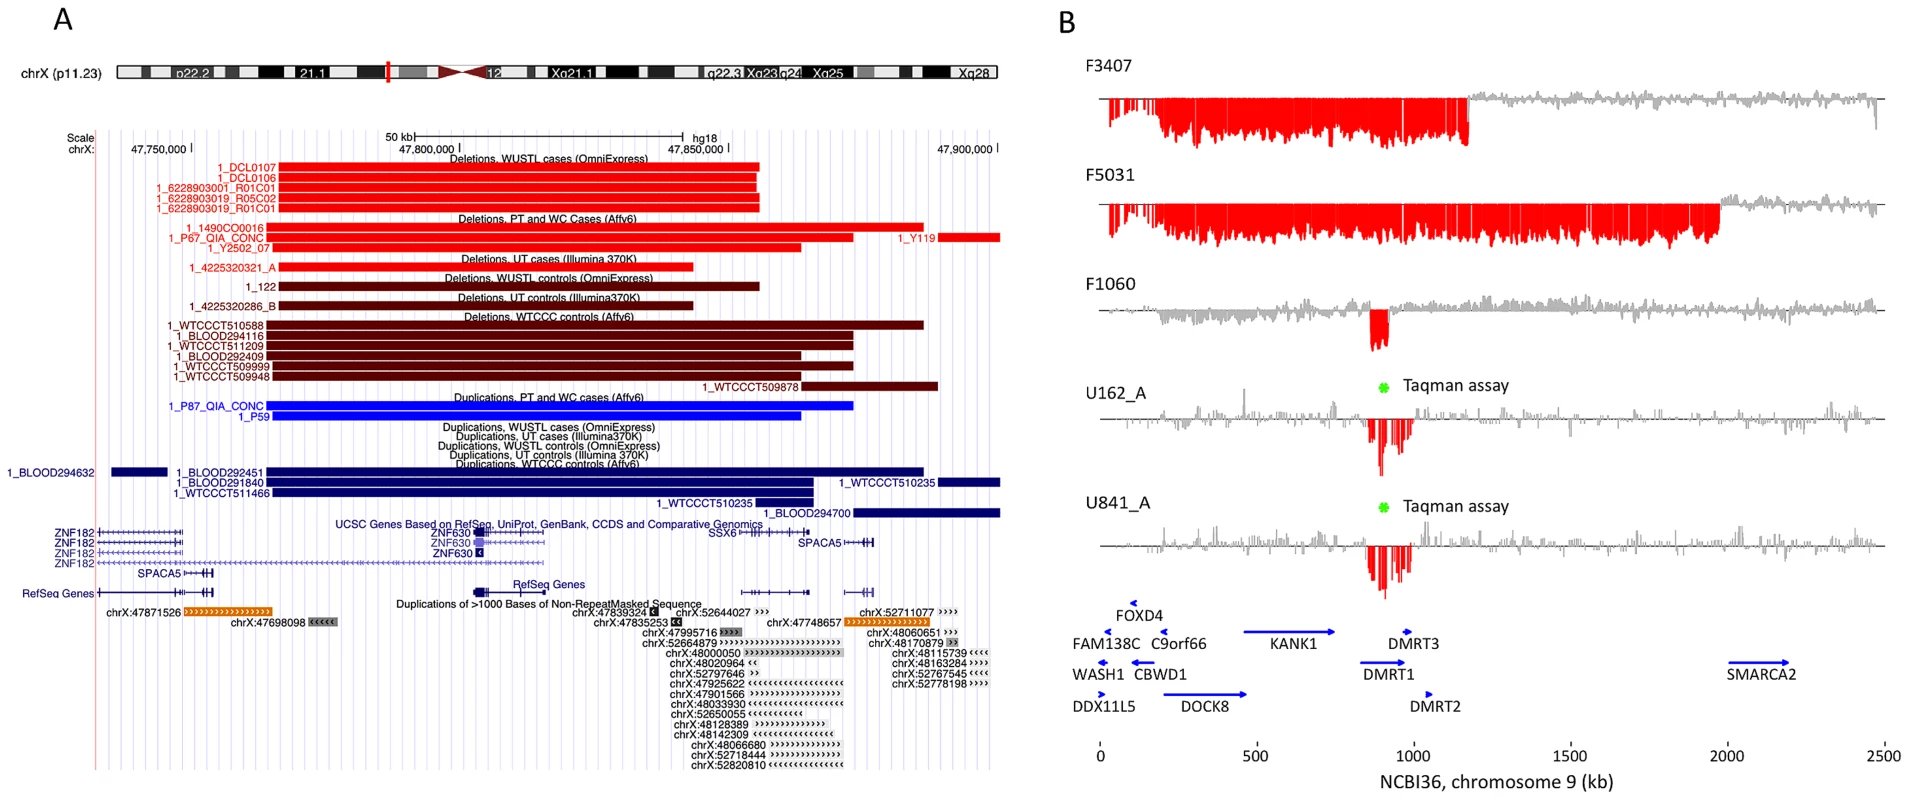 Discovery of recurrent deletions in azoospermia.